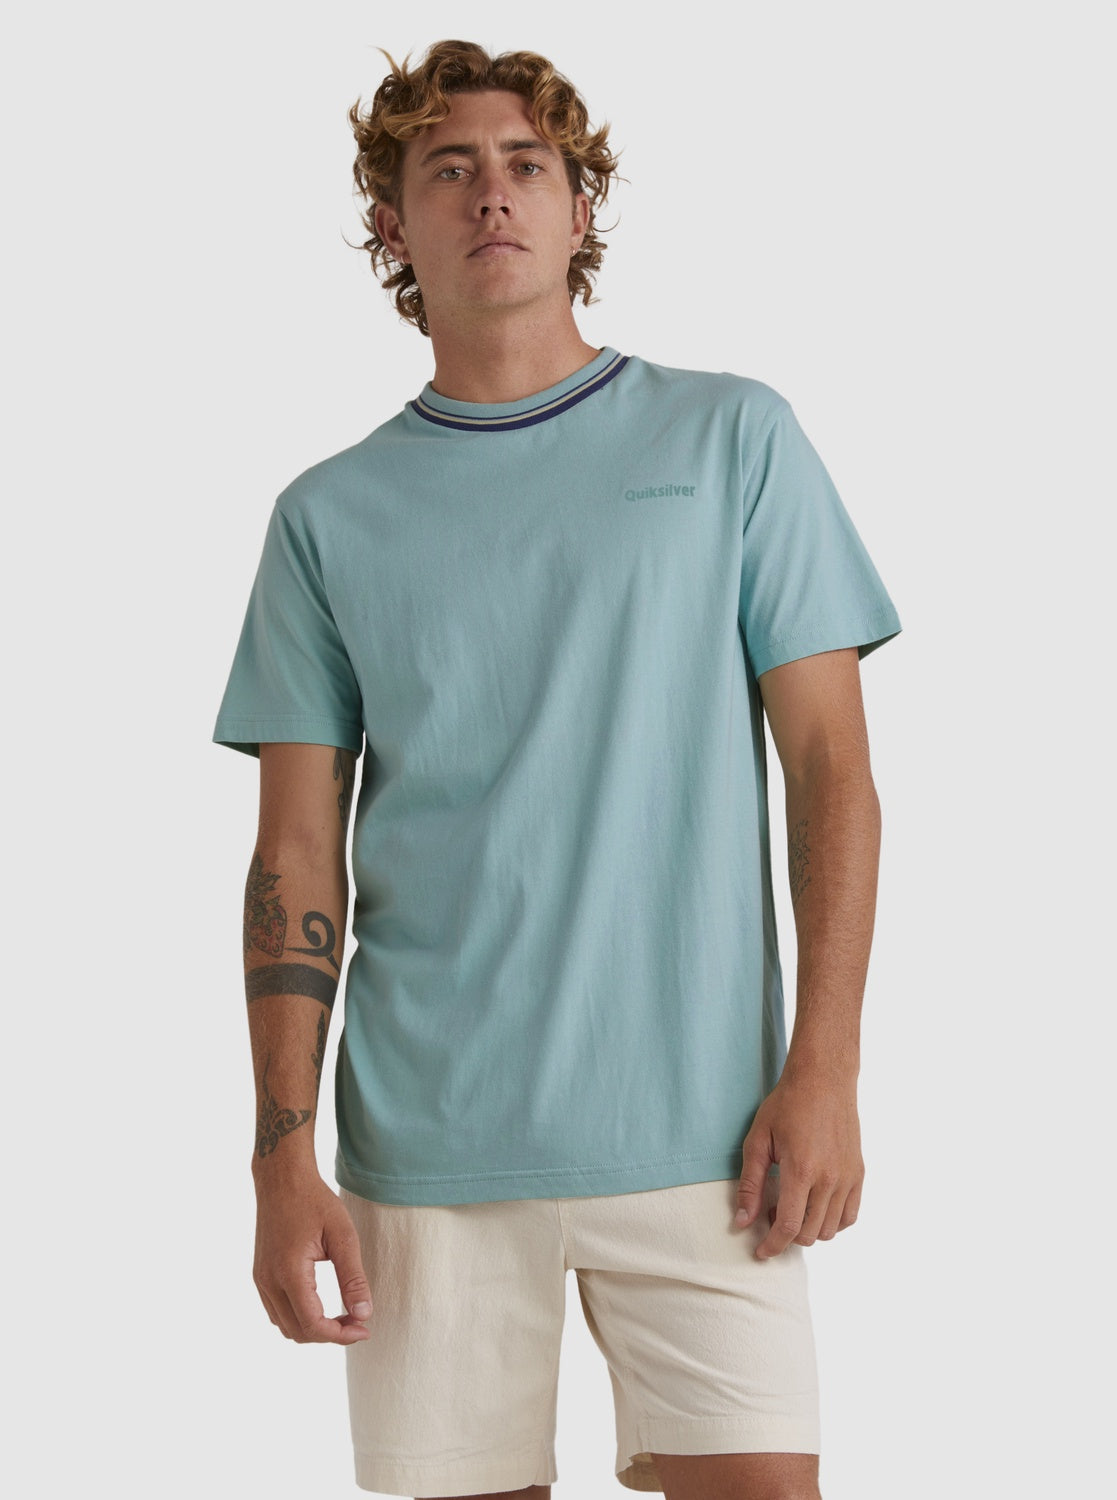 Quiksilver Pacific Fade SS Tee PASTEL TURQUOISE